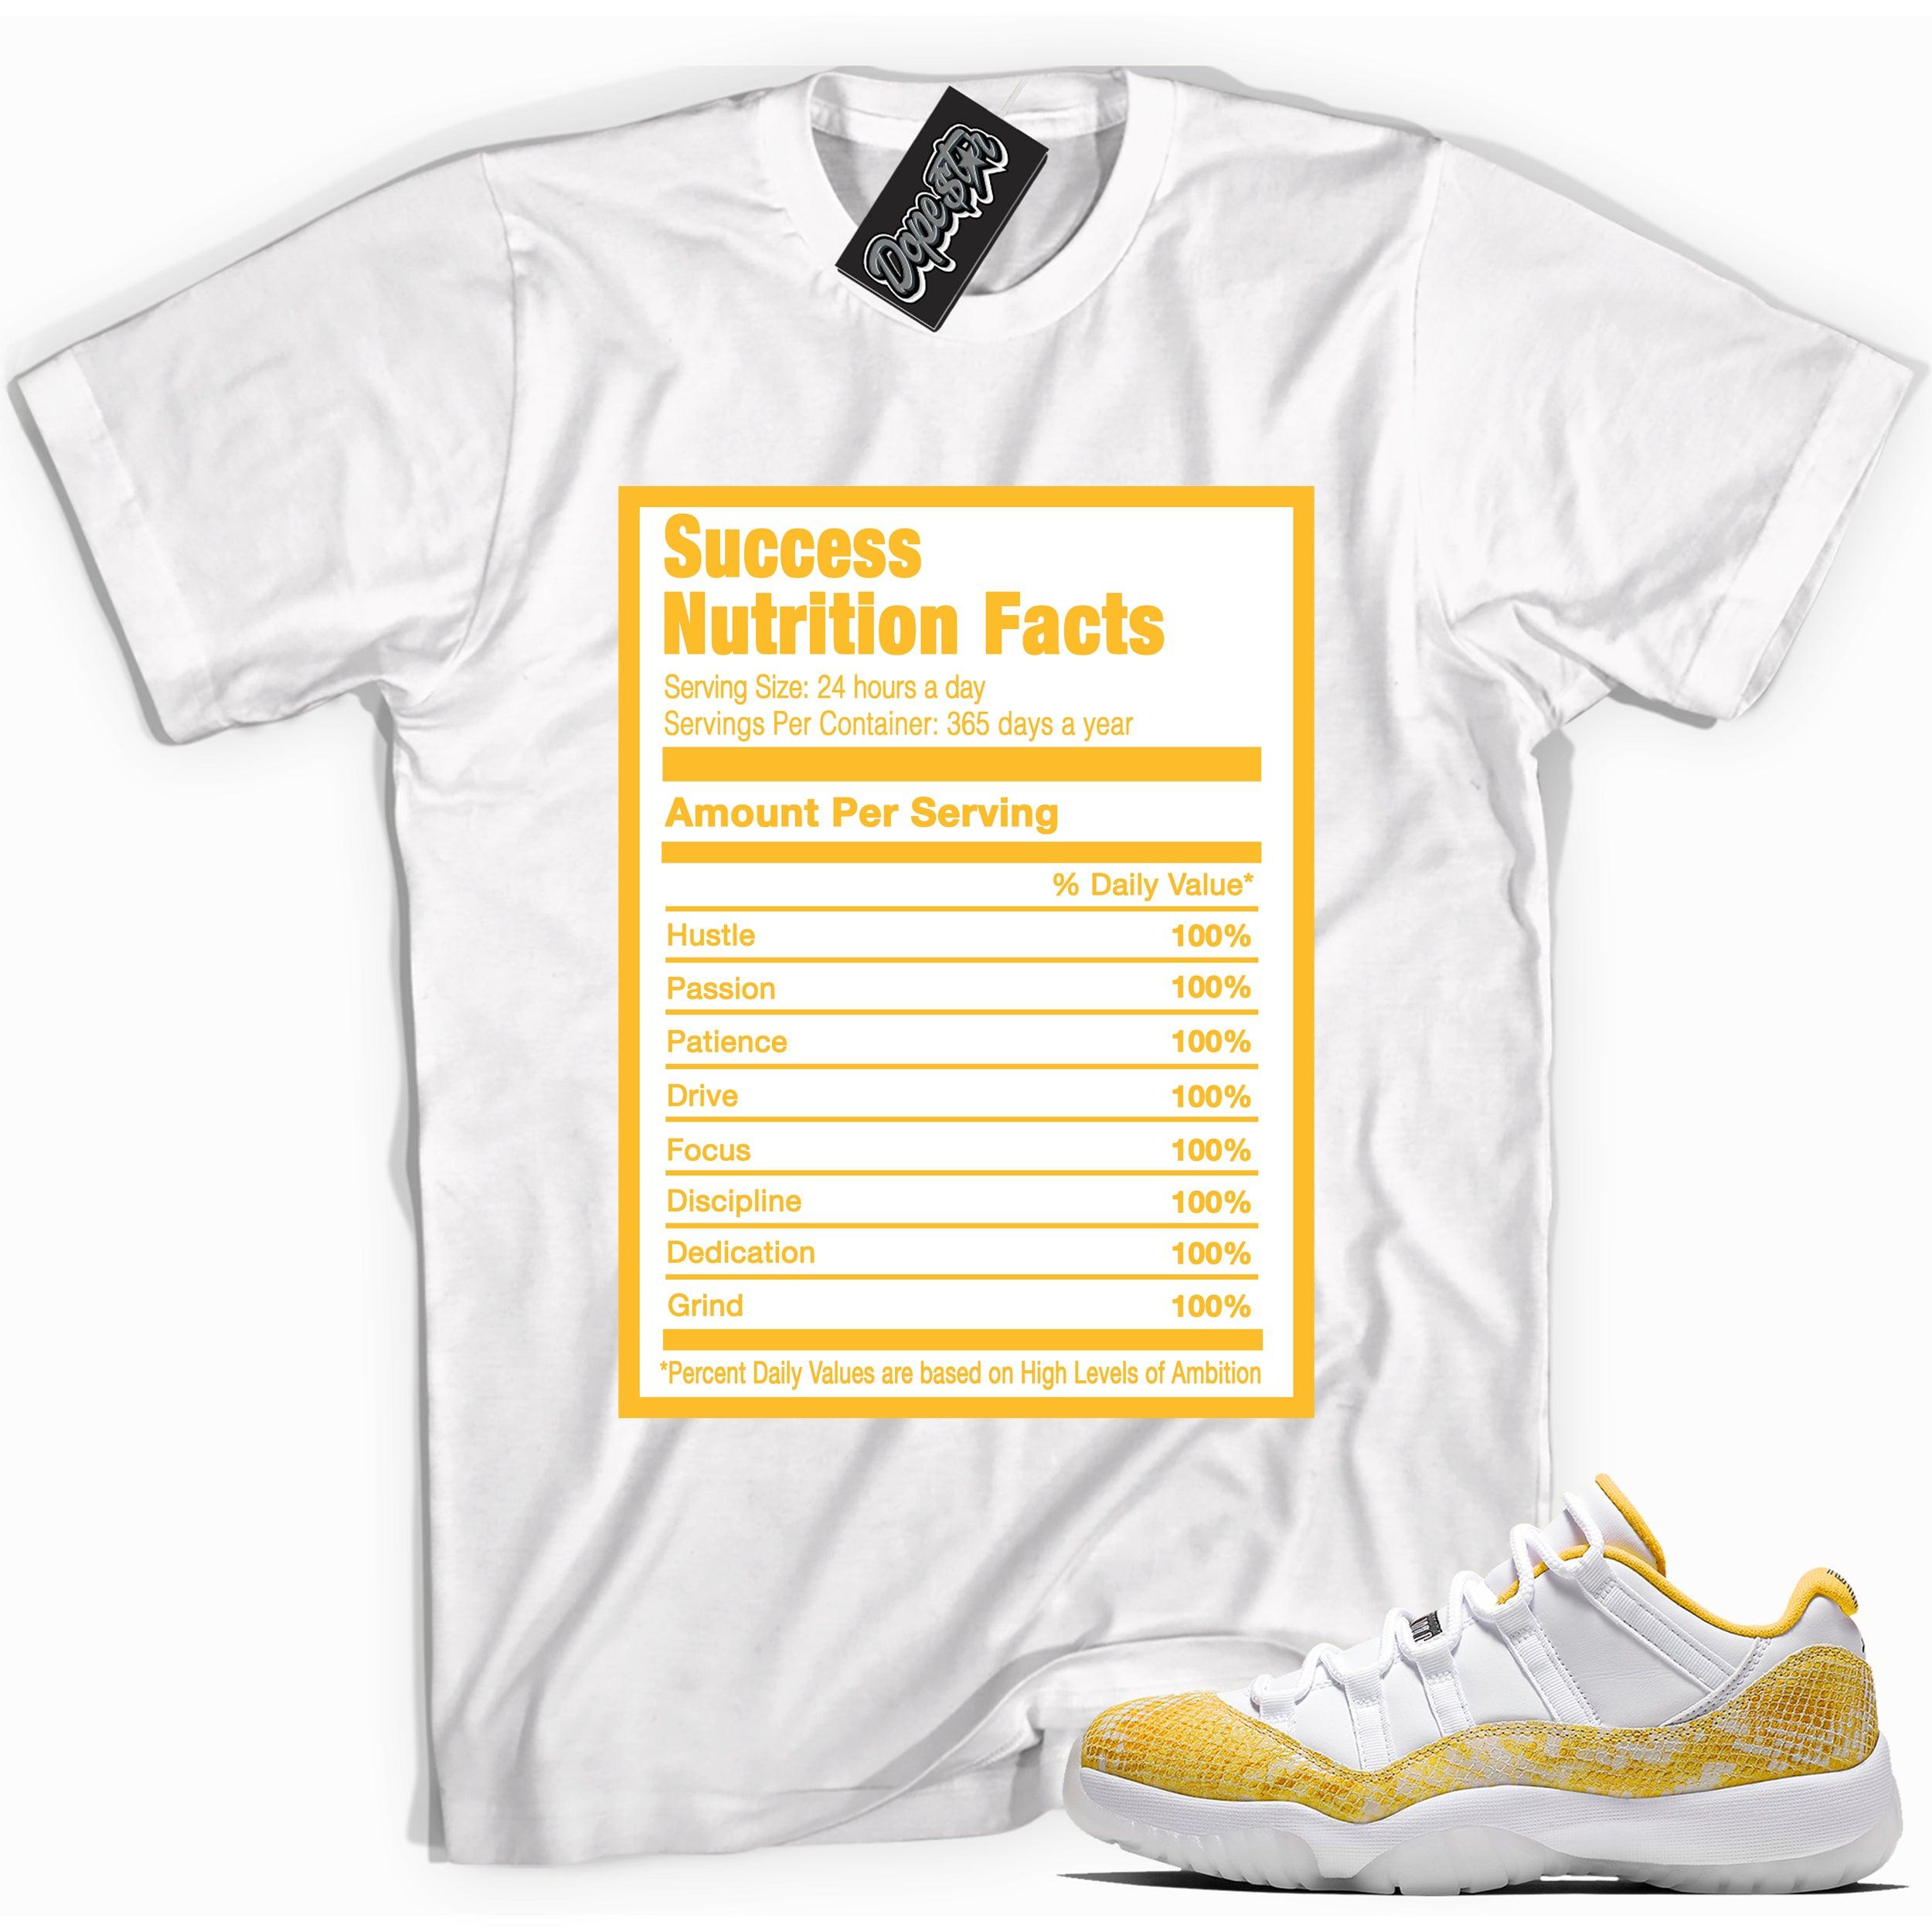 Cool white graphic tee with 'success nutrition facts' print, that perfectly matches Air Jordan 11 Retro Low Yellow Snakeskin sneakers